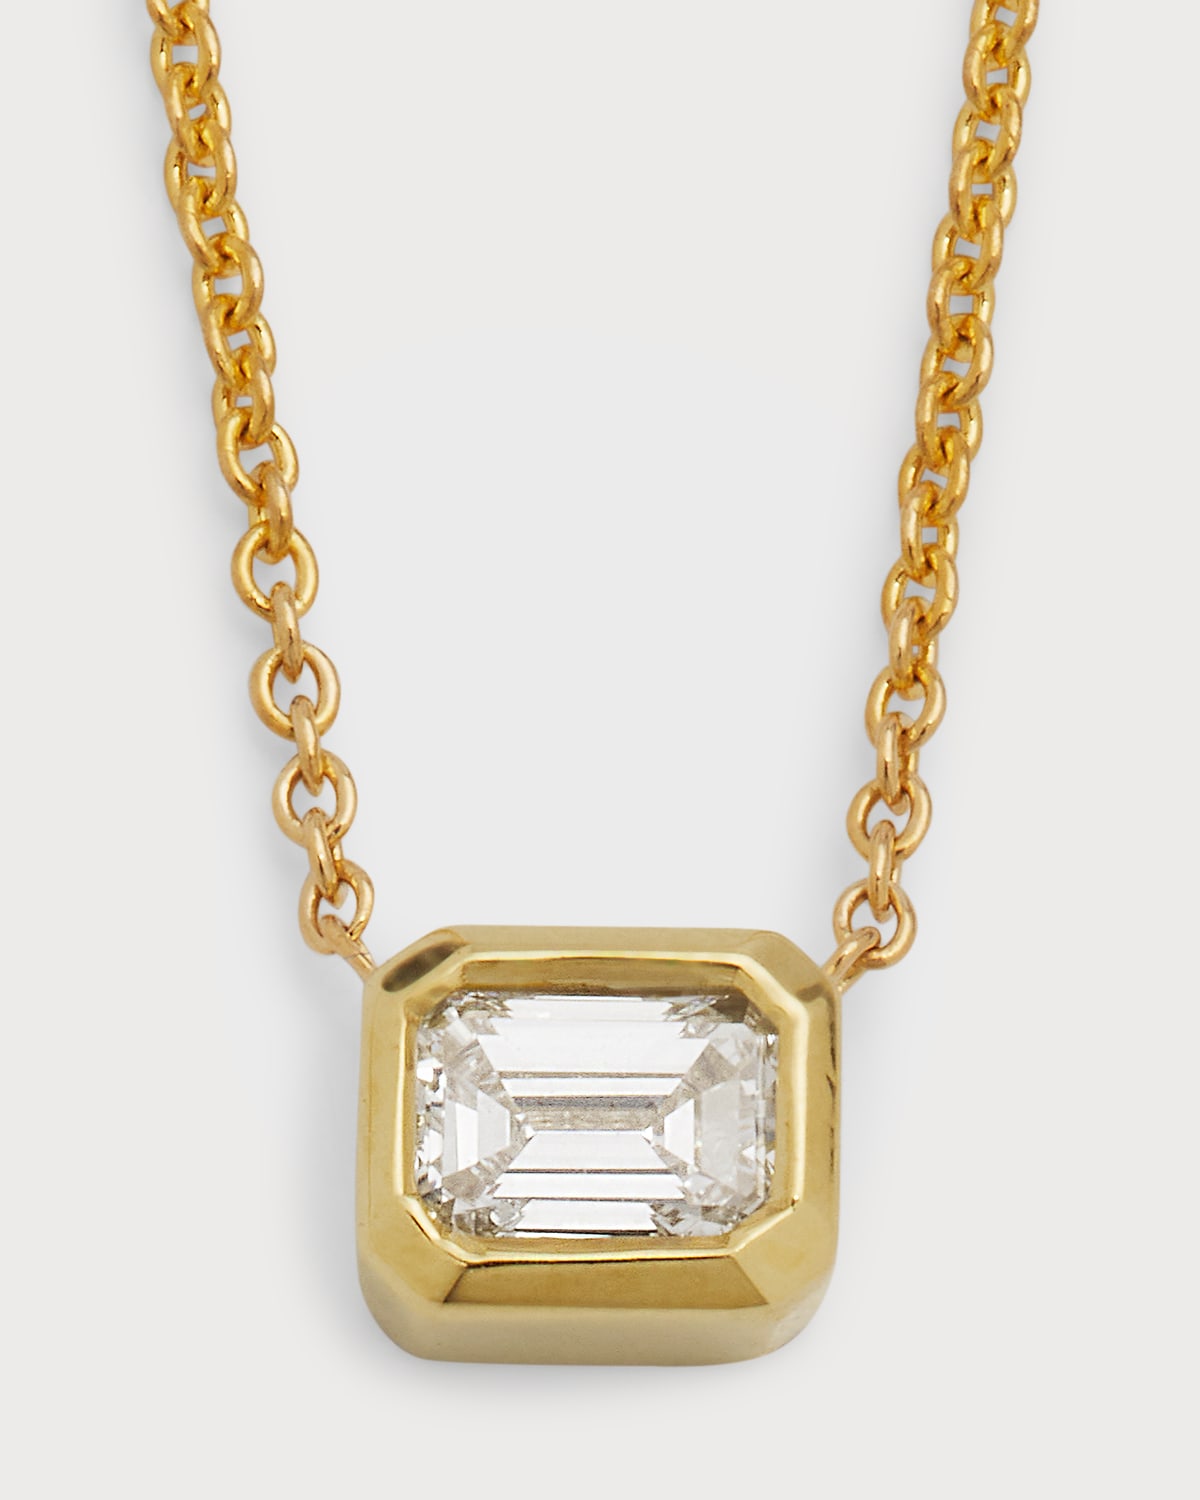 dressing gownRTO COIN 18K EMERALD-CUT DIAMOND SOLITAIRE NECKLACE,PROD221270129